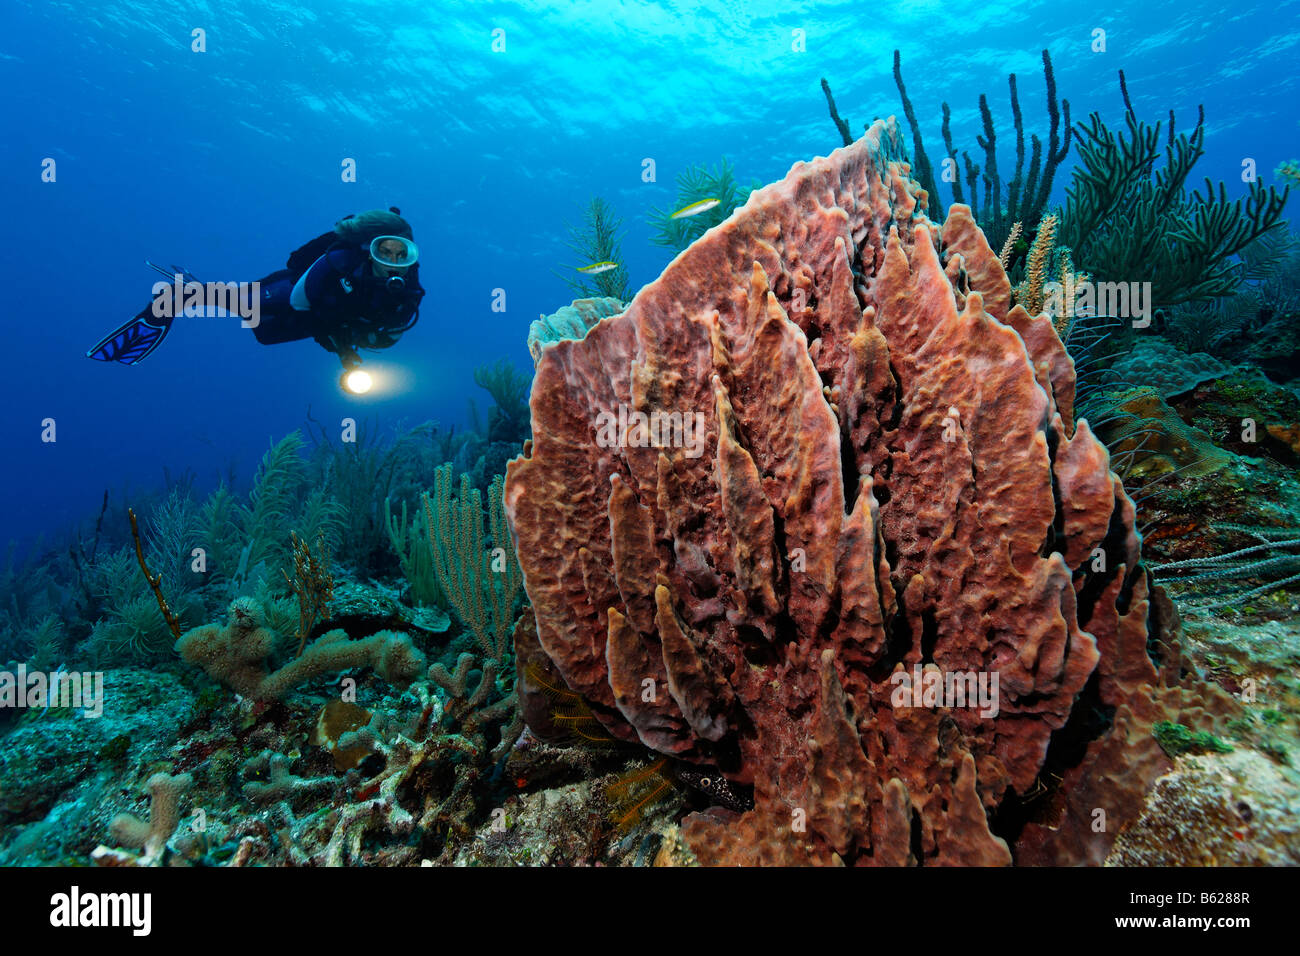 Female diver with a lamp looking at a Barrel Sponge (Xestospongia muta) in a coral reef, Hopkins, Dangria, Belize, Central Amer Stock Photo